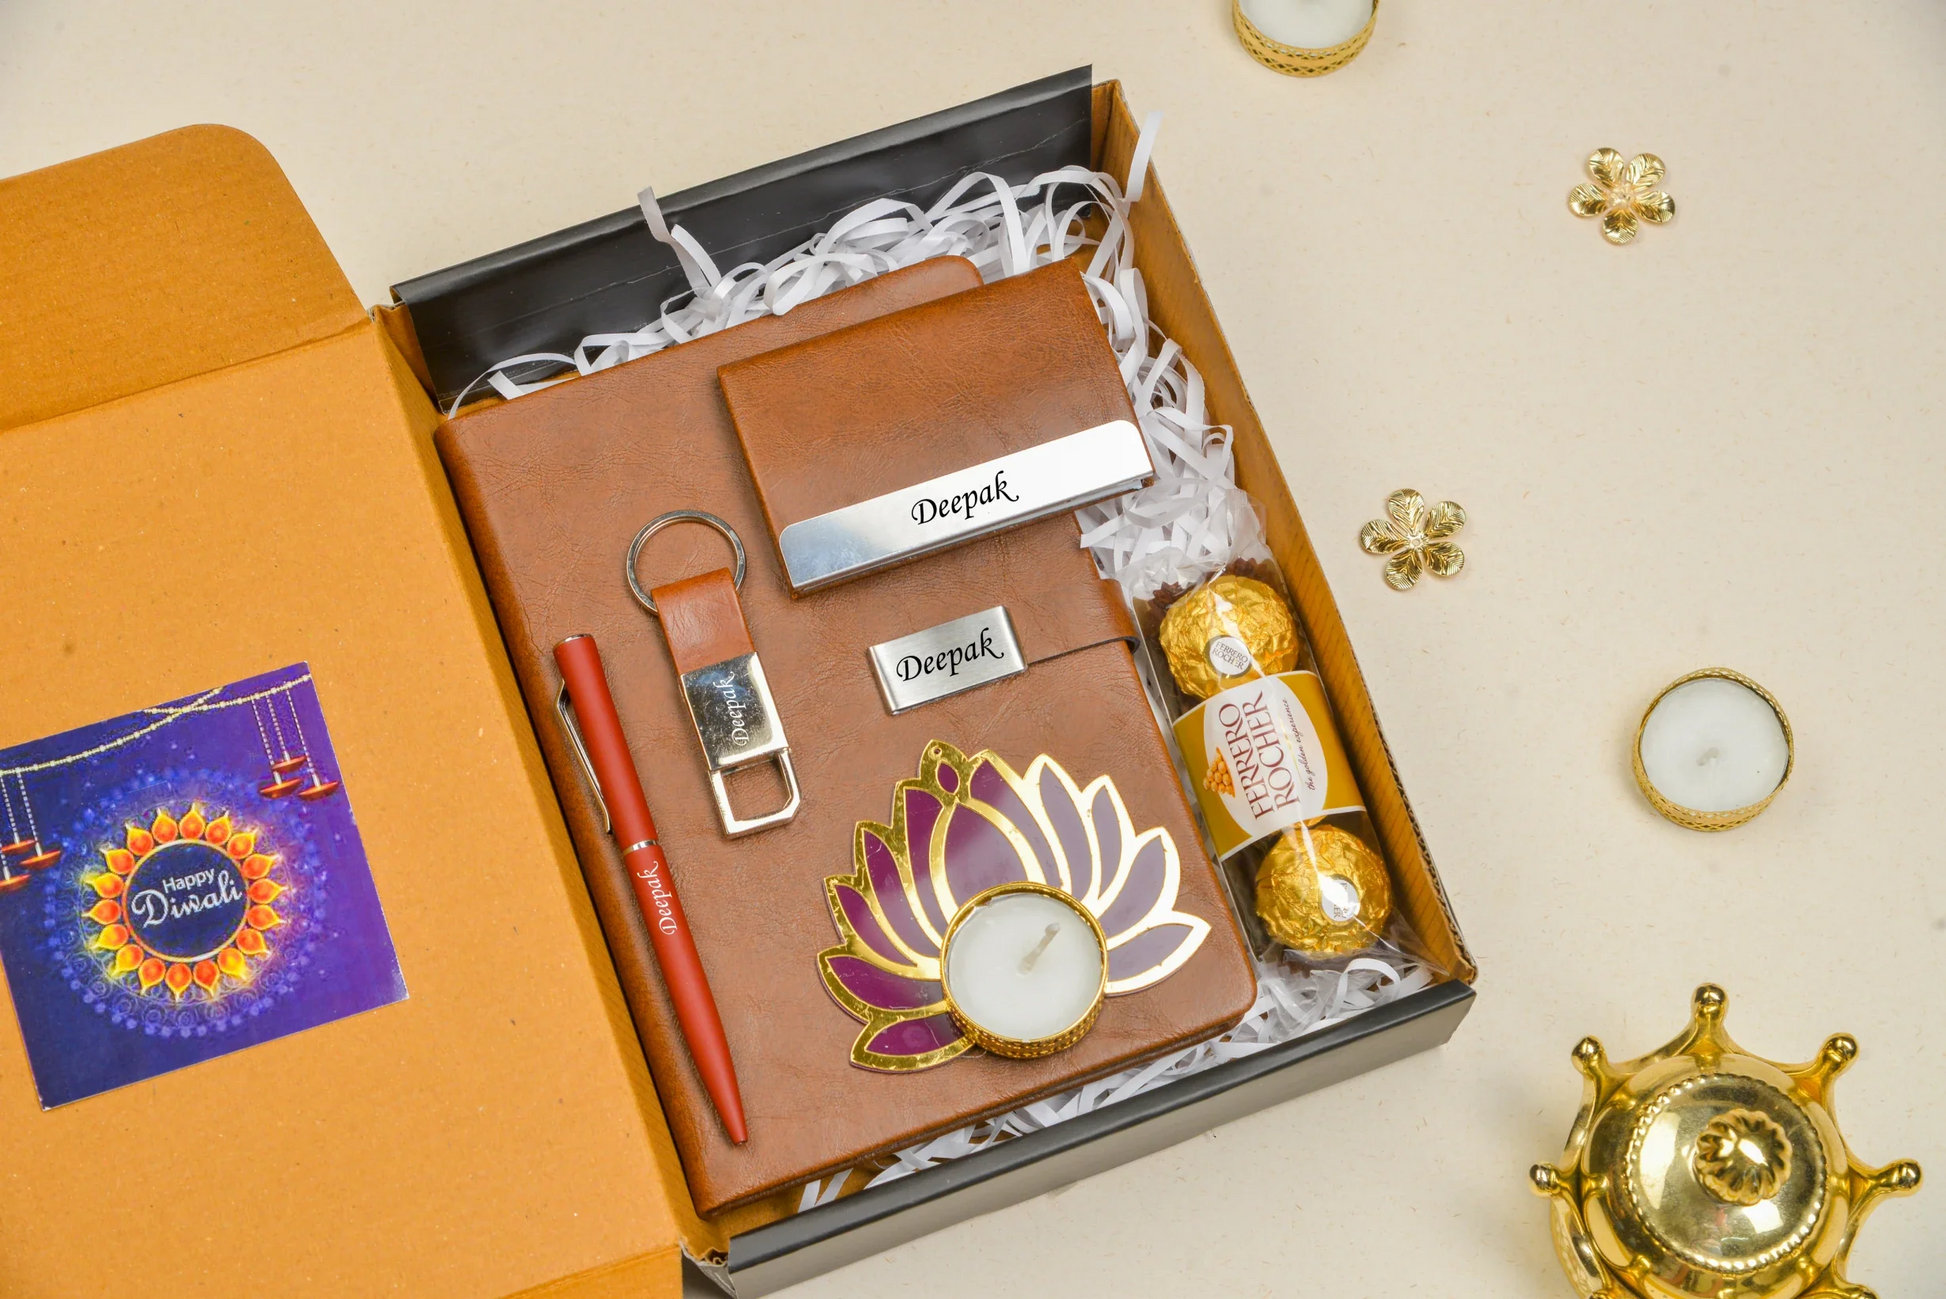 Celebrate the festive season with our Diwali Combo! This set features a stylish diary, a useful keychain, a beautiful diya, delicious chocolates, a sleek pen, and a practical card holder. The perfect gift for friends and family!